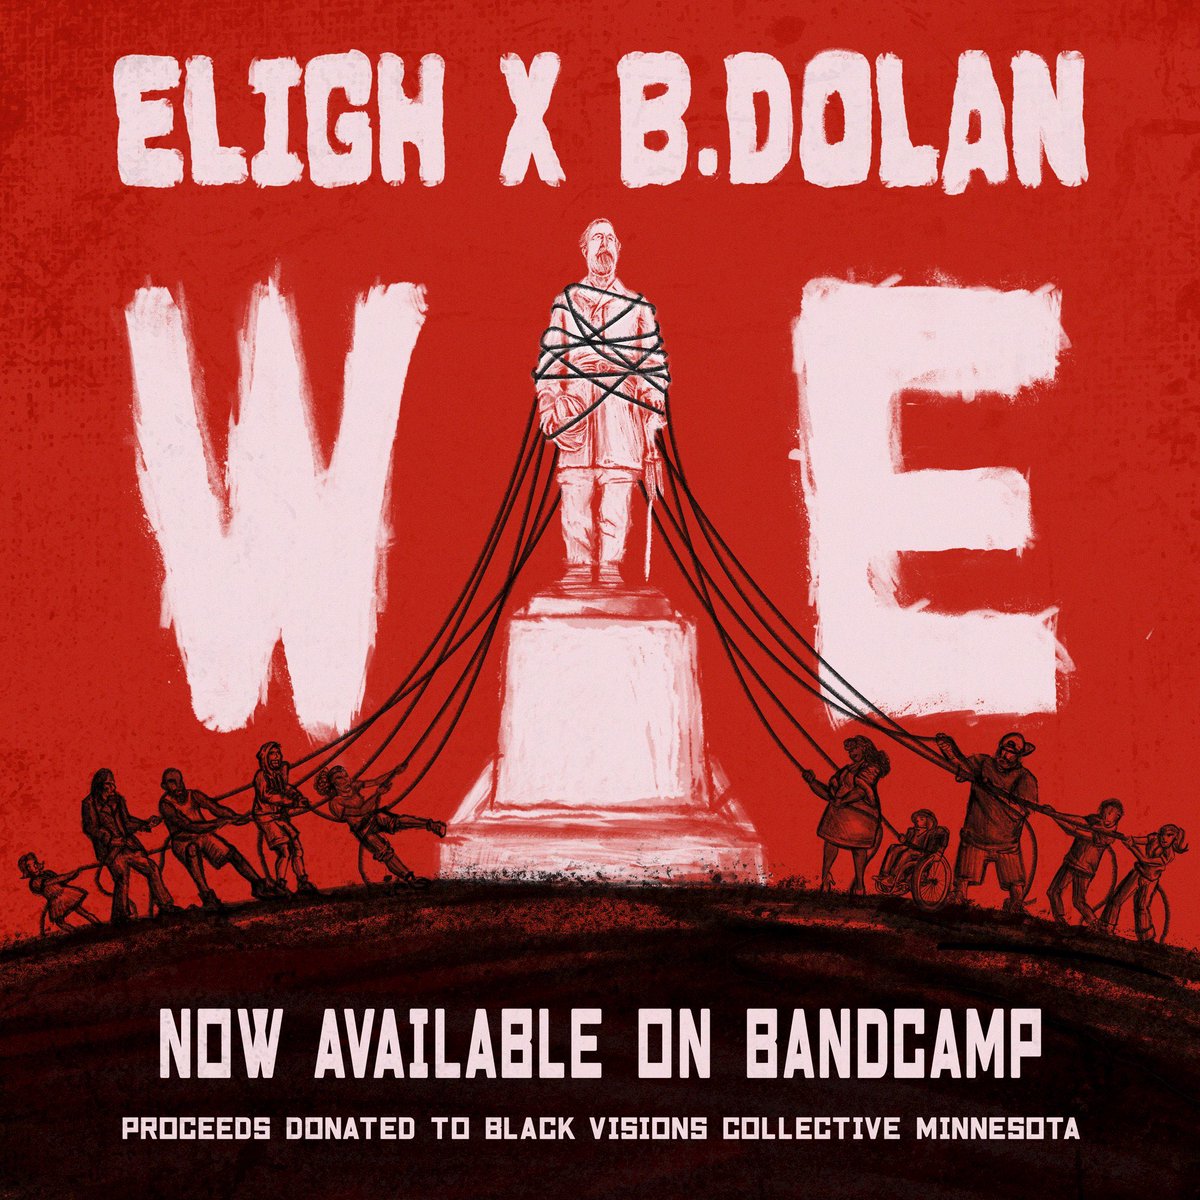 New single for #BandcampFriday. Me + @eligh = WE. Artwork by @DamnSelene. 100% proceeds headed to @BlackVisionsMN. Shout to @Bandcamp! bdolan.bandcamp.com/track/we